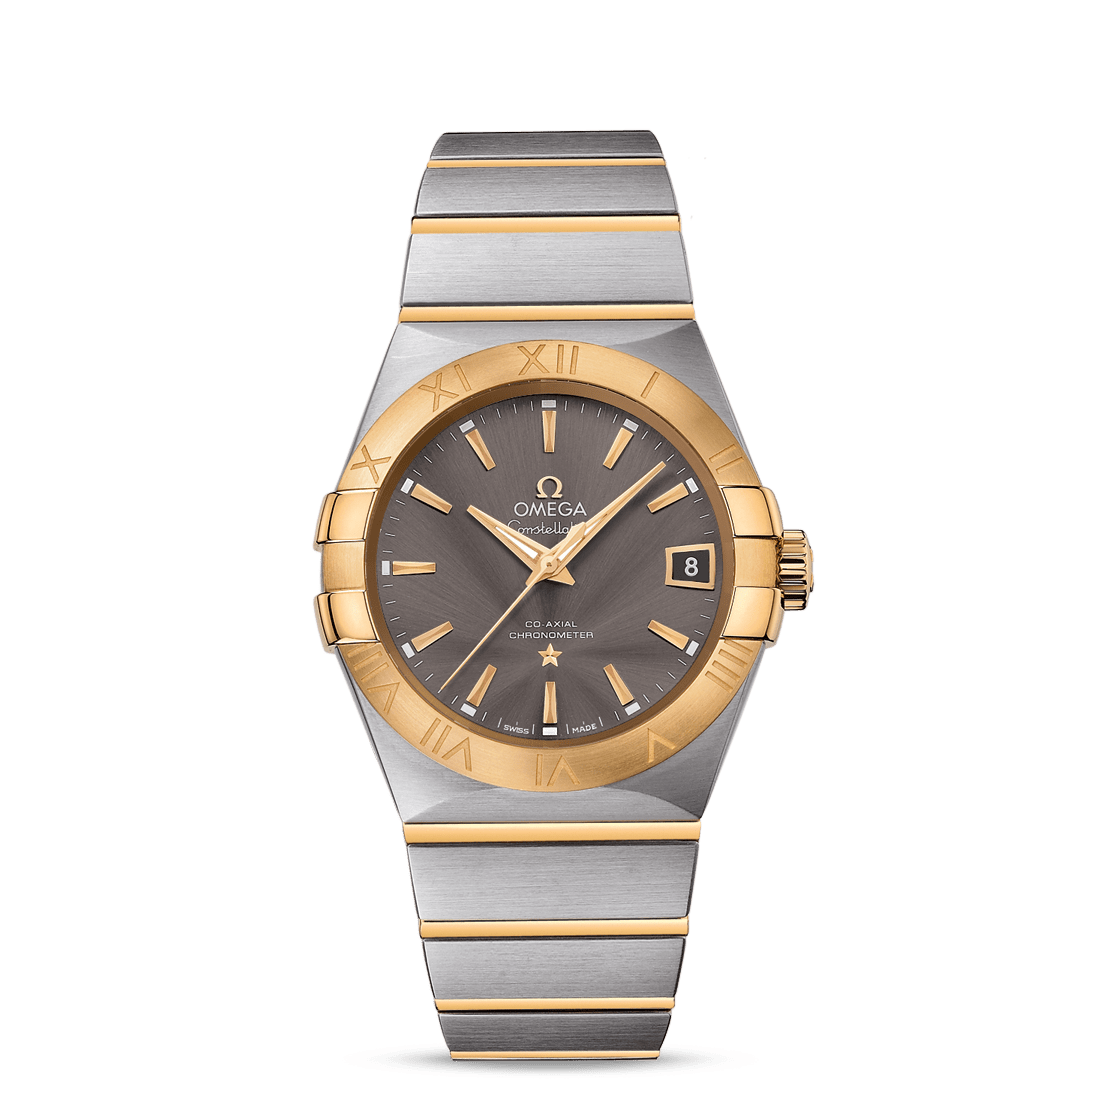 Omega Constellation Co-axial 123.20.38.21.06.001